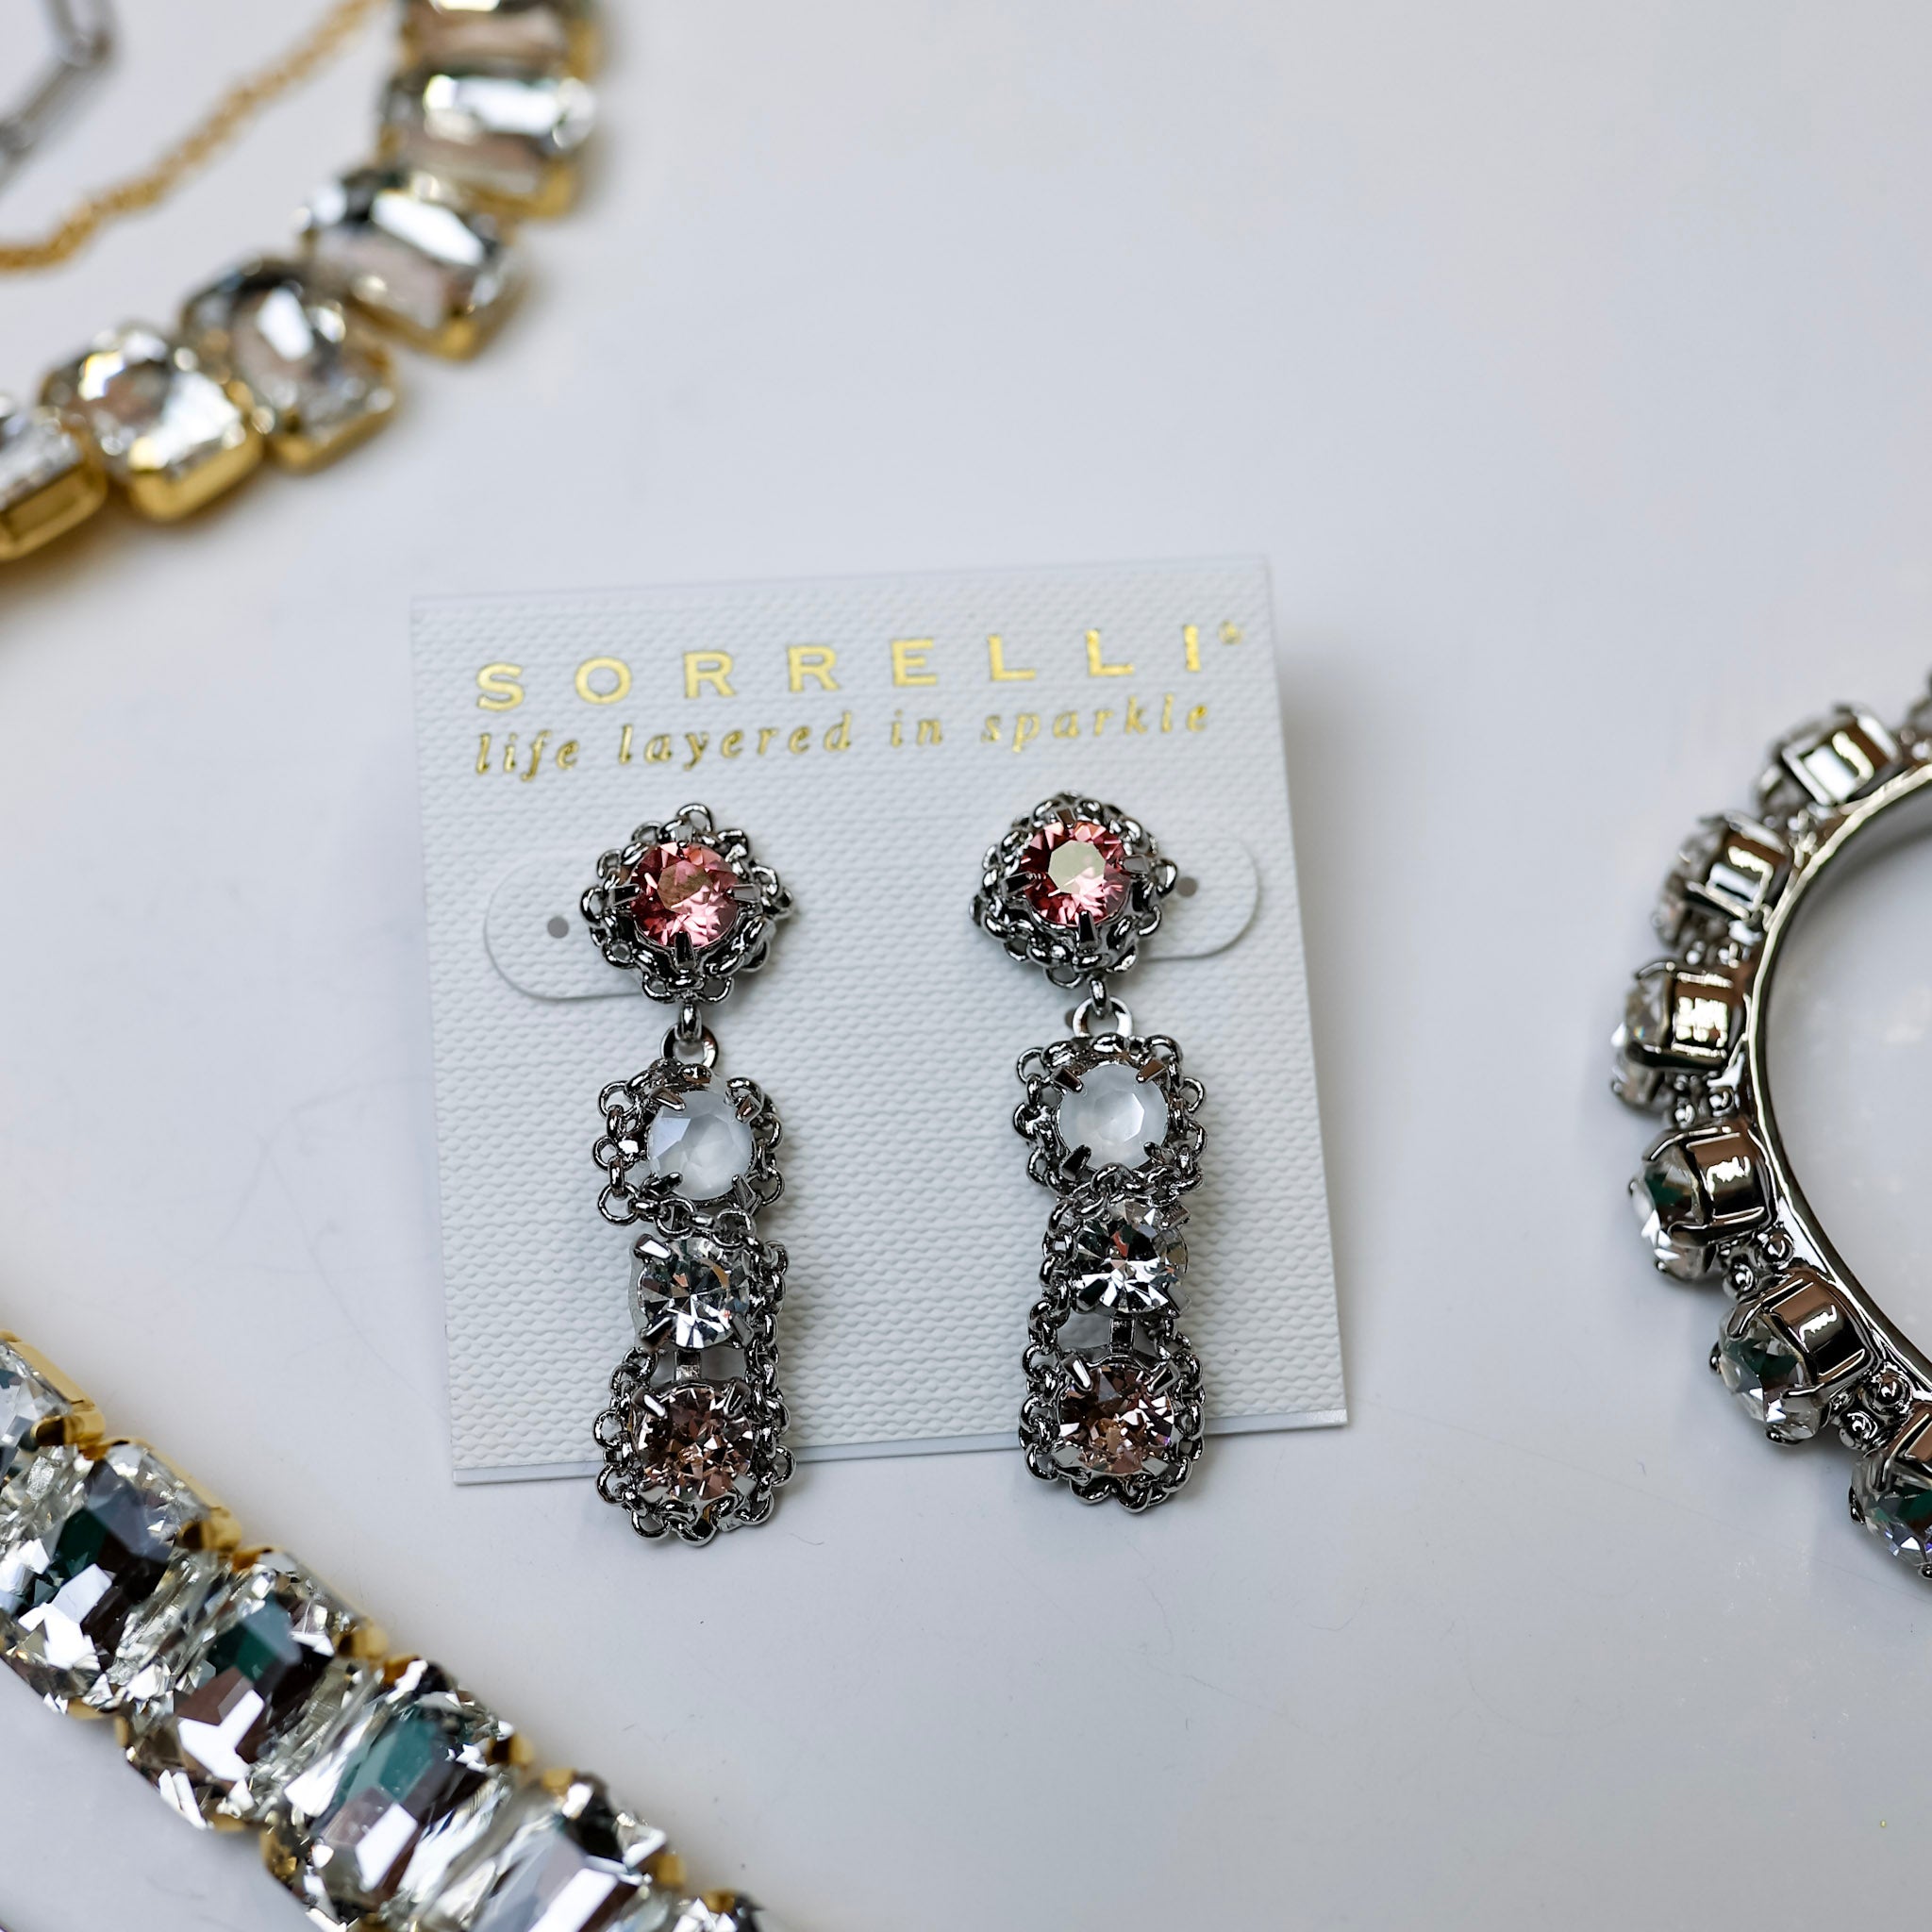 A pair of silver-tone dangle earrings with blush pink and white crystals and chain detailing. Pictured on a white background with crystal necklaces.